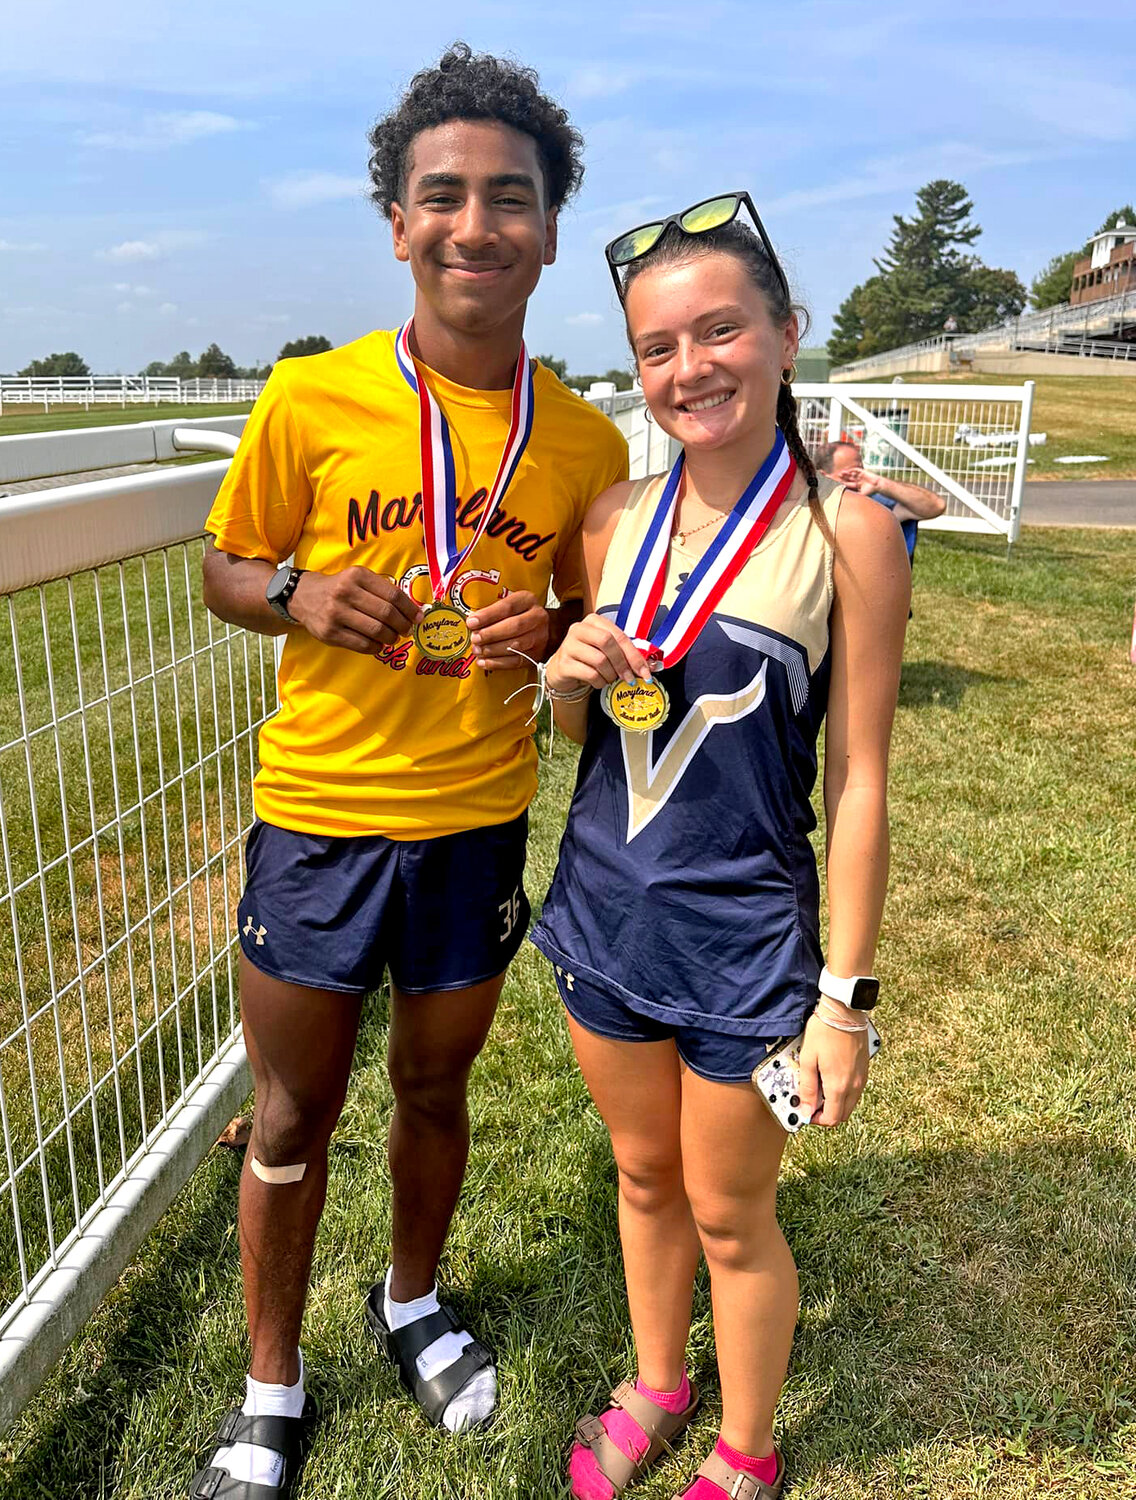 Tekai Drummond and Cam Russum medaled in 19th and 14th places, respectively, at the Maryland Track and Trail Invitational on Saturday morning at Bohemia Manor in Cecil County. The annual meet attracts athletes from around the state.